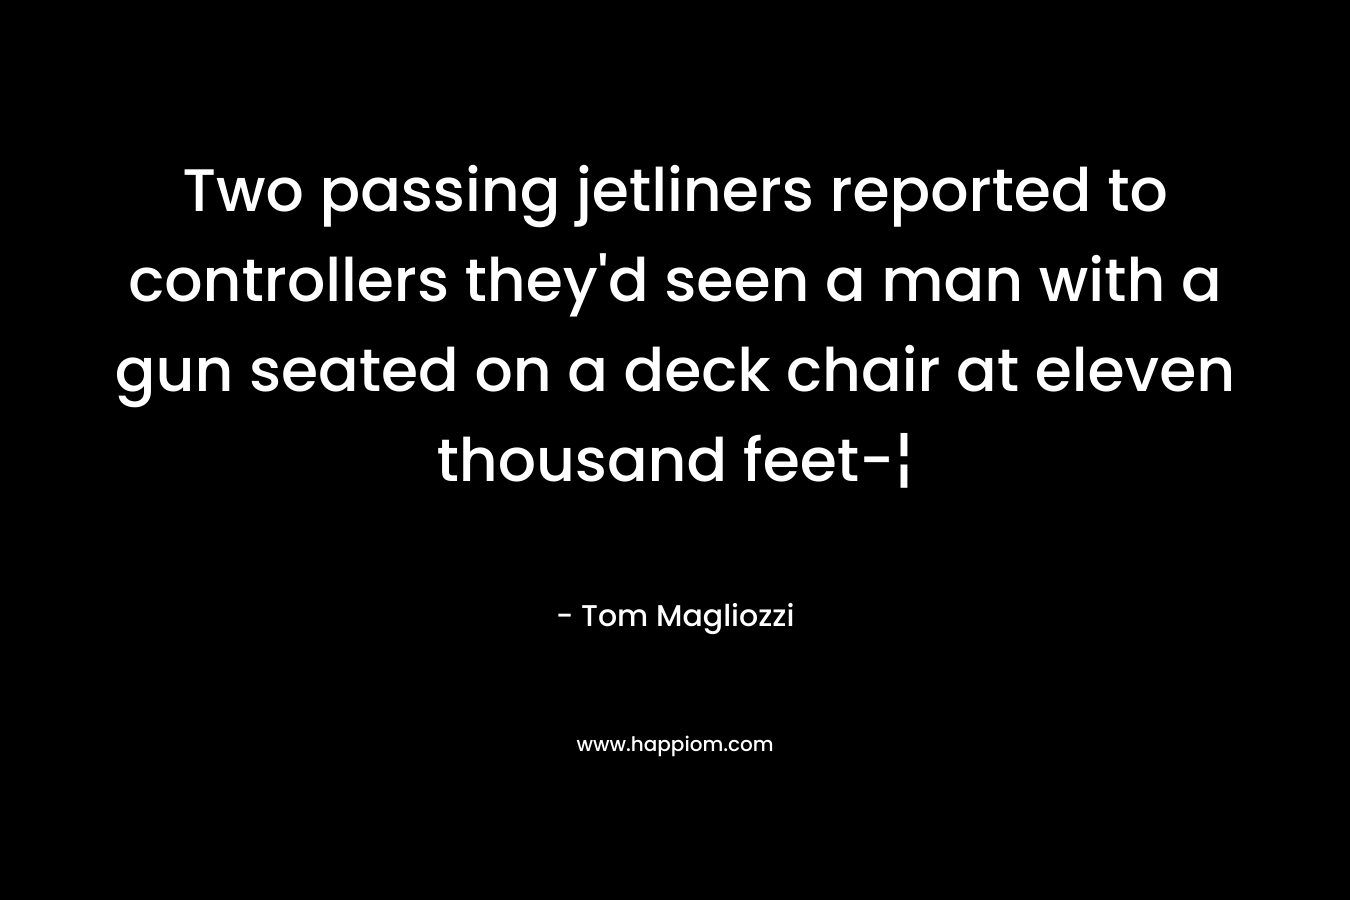 Two passing jetliners reported to controllers they’d seen a man with a gun seated on a deck chair at eleven thousand feet-¦ – Tom Magliozzi